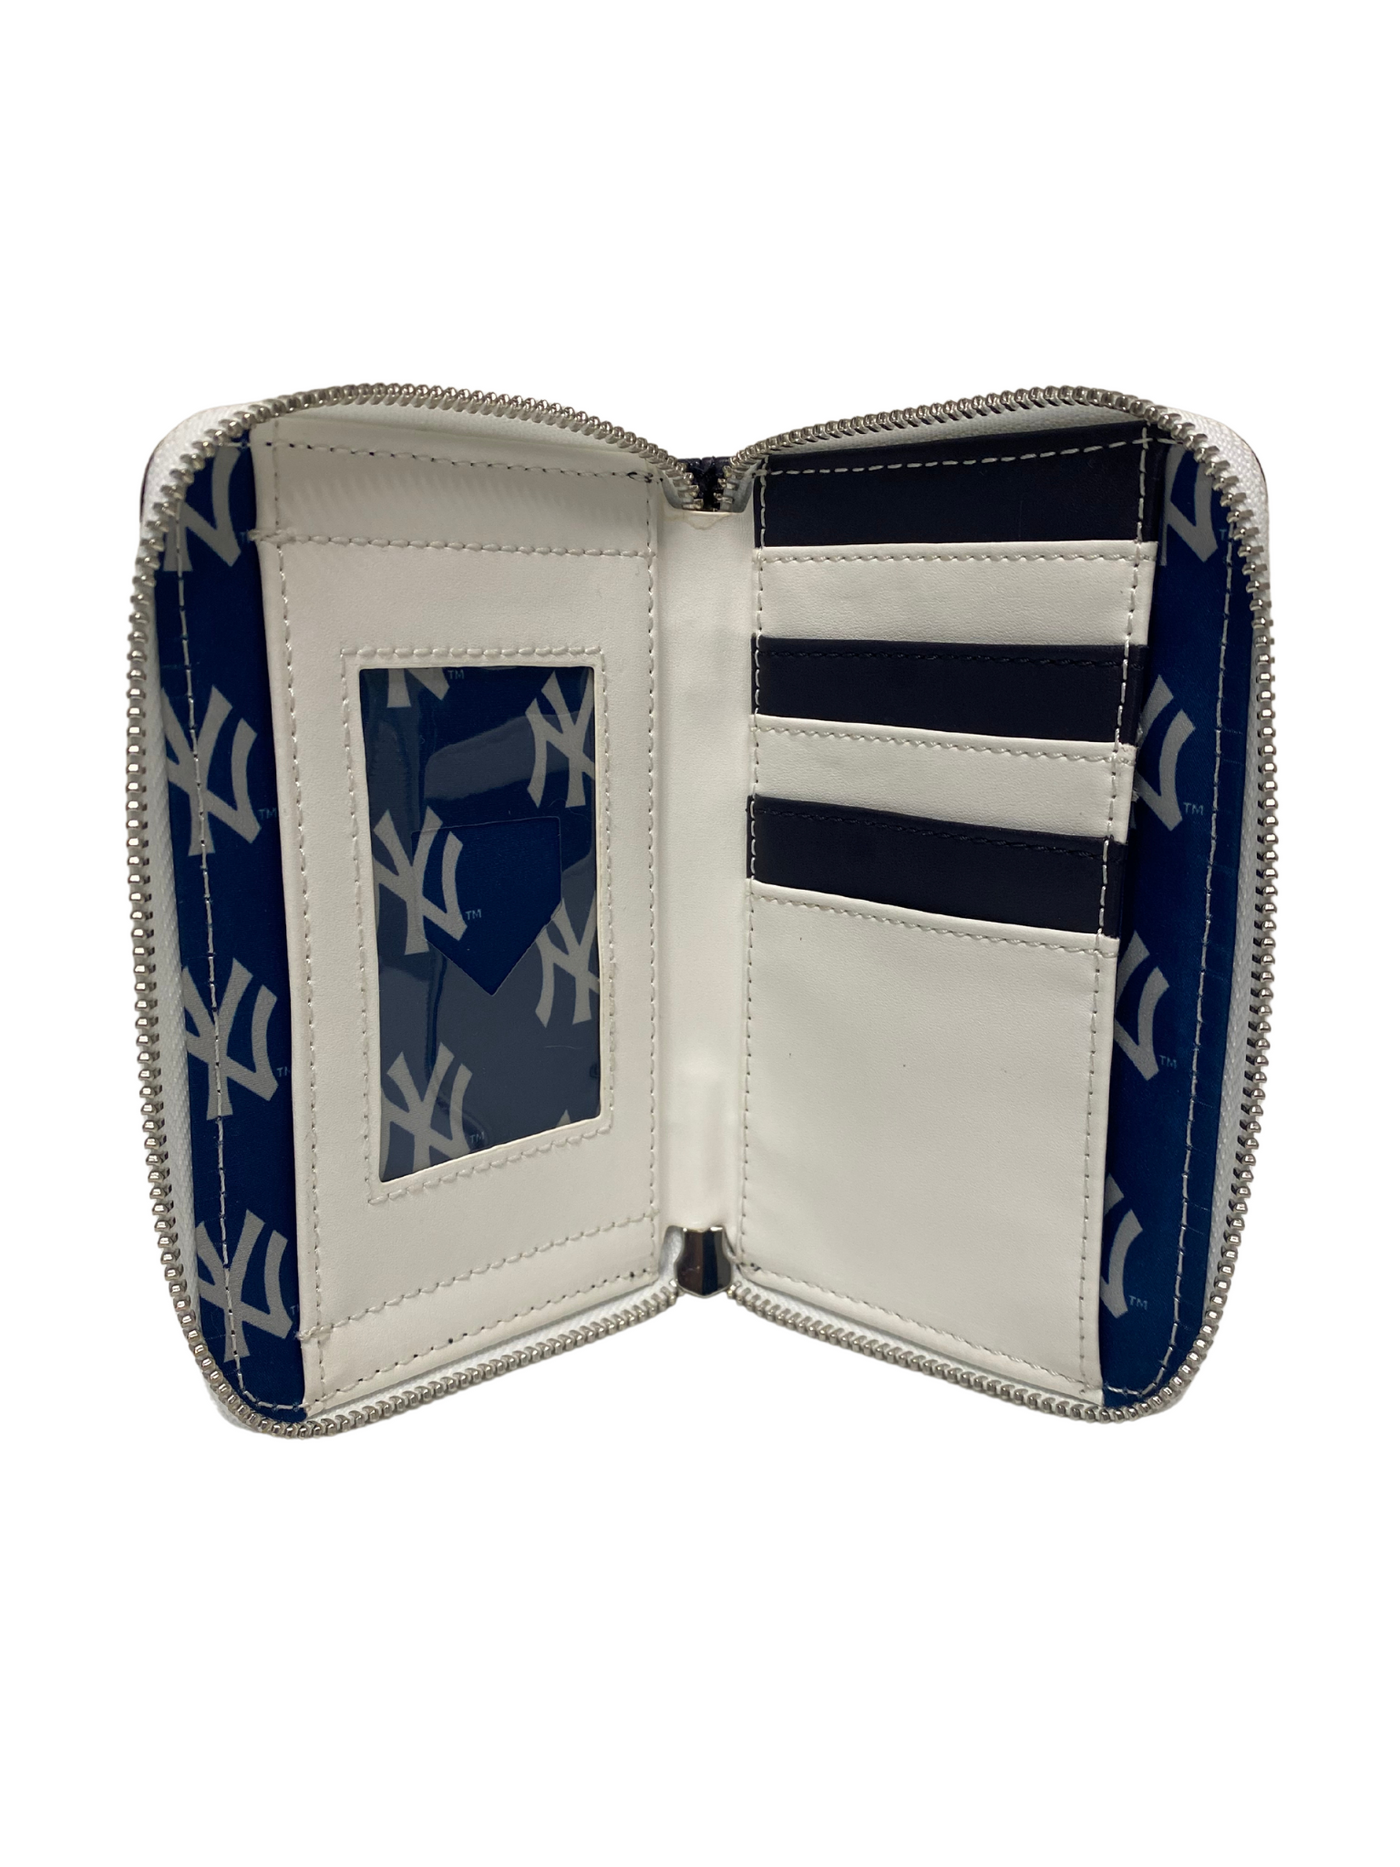 Loungefly La Dodgers Patches Accordion Wallet MLB